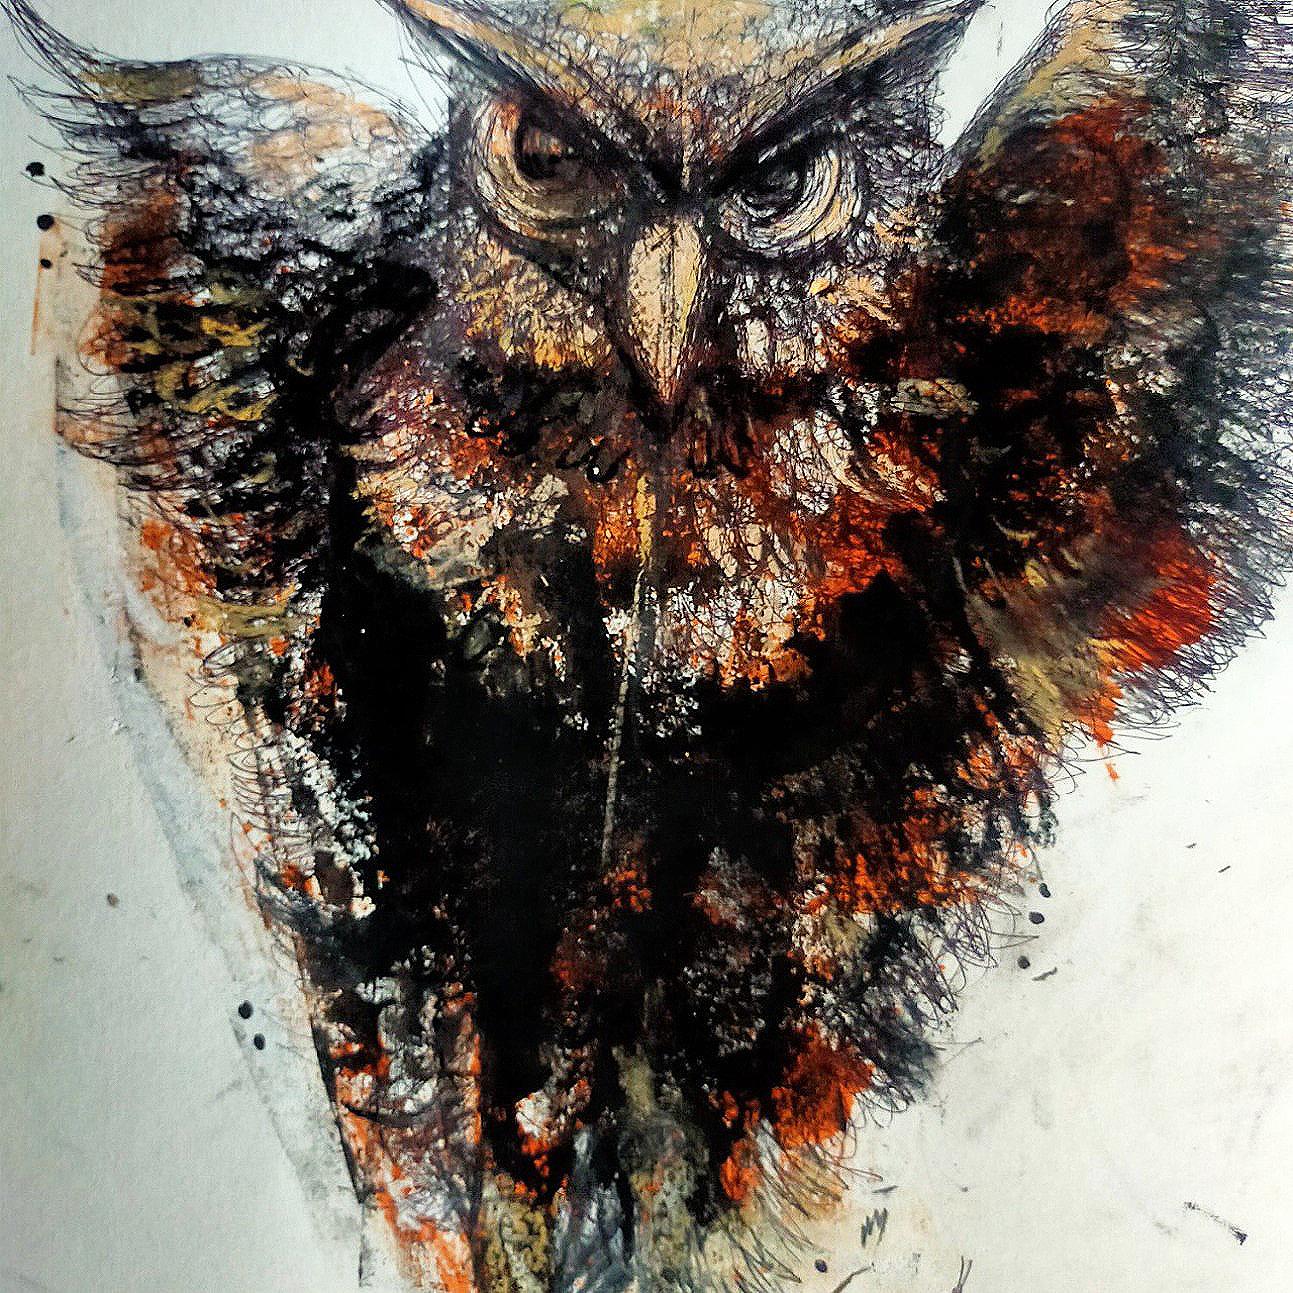 Sekhar Kar - Owl, Mixed Media on Paper
24 x 15 inches (Unframed)
( UNFRAMED  ALL  IN  DELIVERED  PRICE )

Style : Sekhar Kar's paintings depict men and women in swirling masses of color with cesspools of emptiness for eyes. This allows the viewers